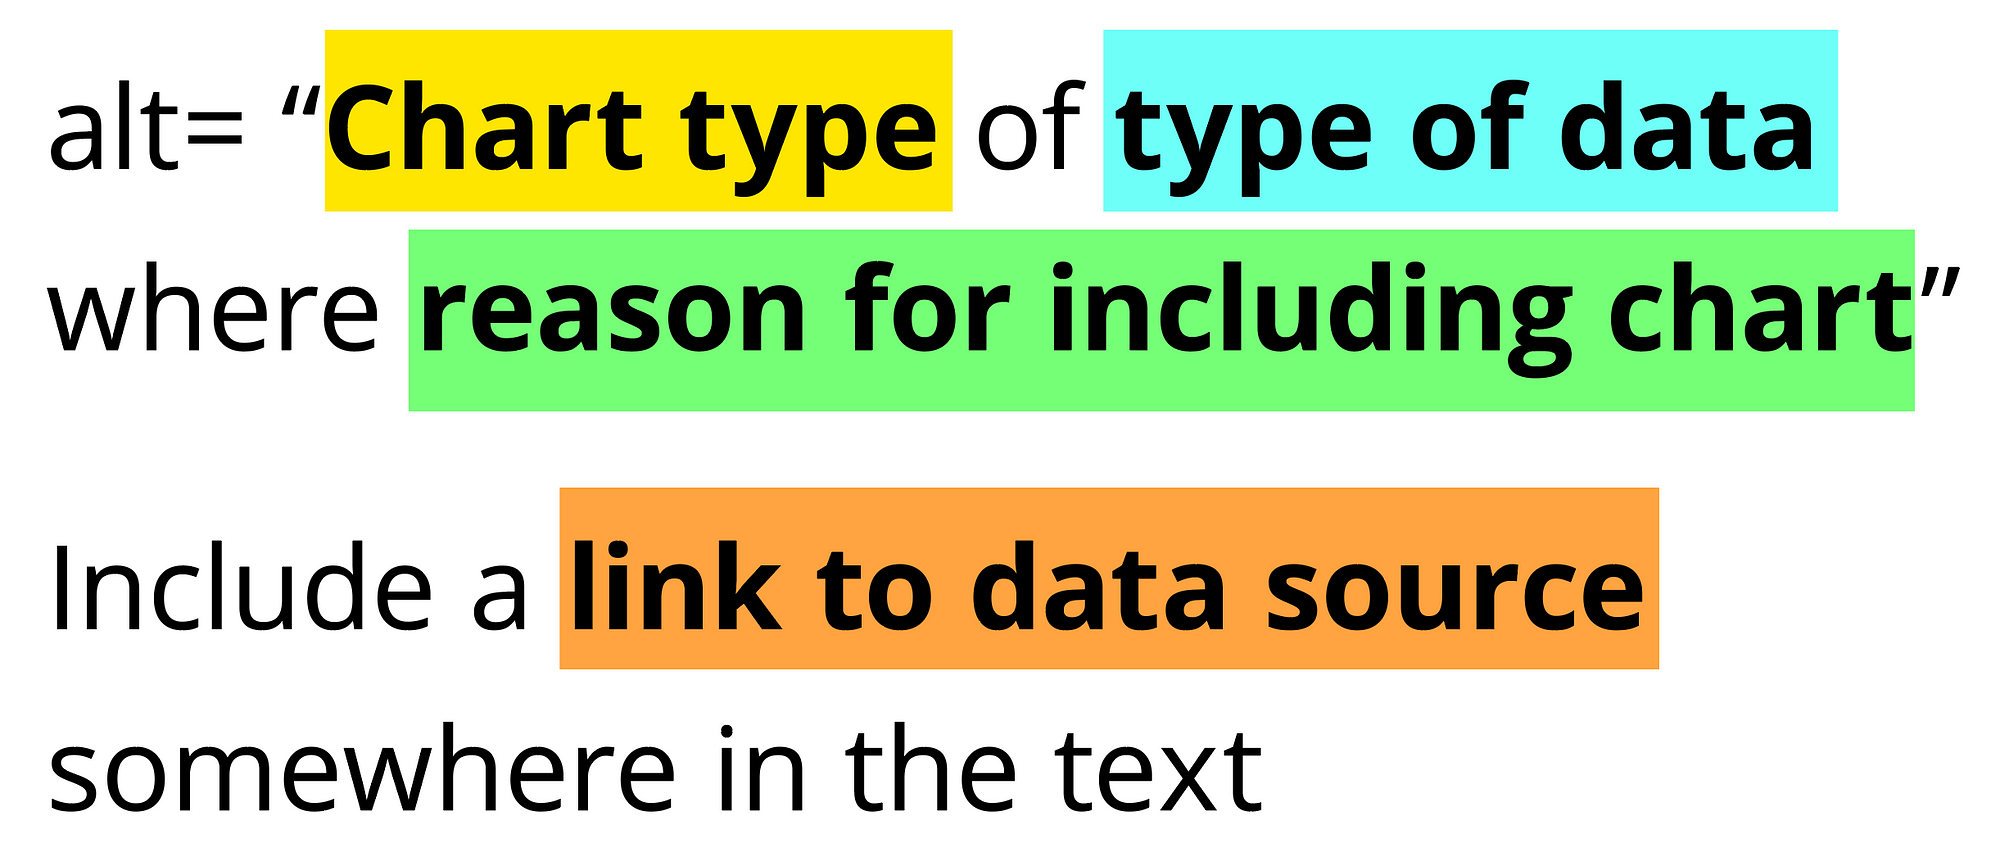 A formula for writing alternative text, which says you should always include (a) the chart type, (b) the type of data being presented, and (c) the reason for including the chart. You should also link to the data source somewhere in the text.